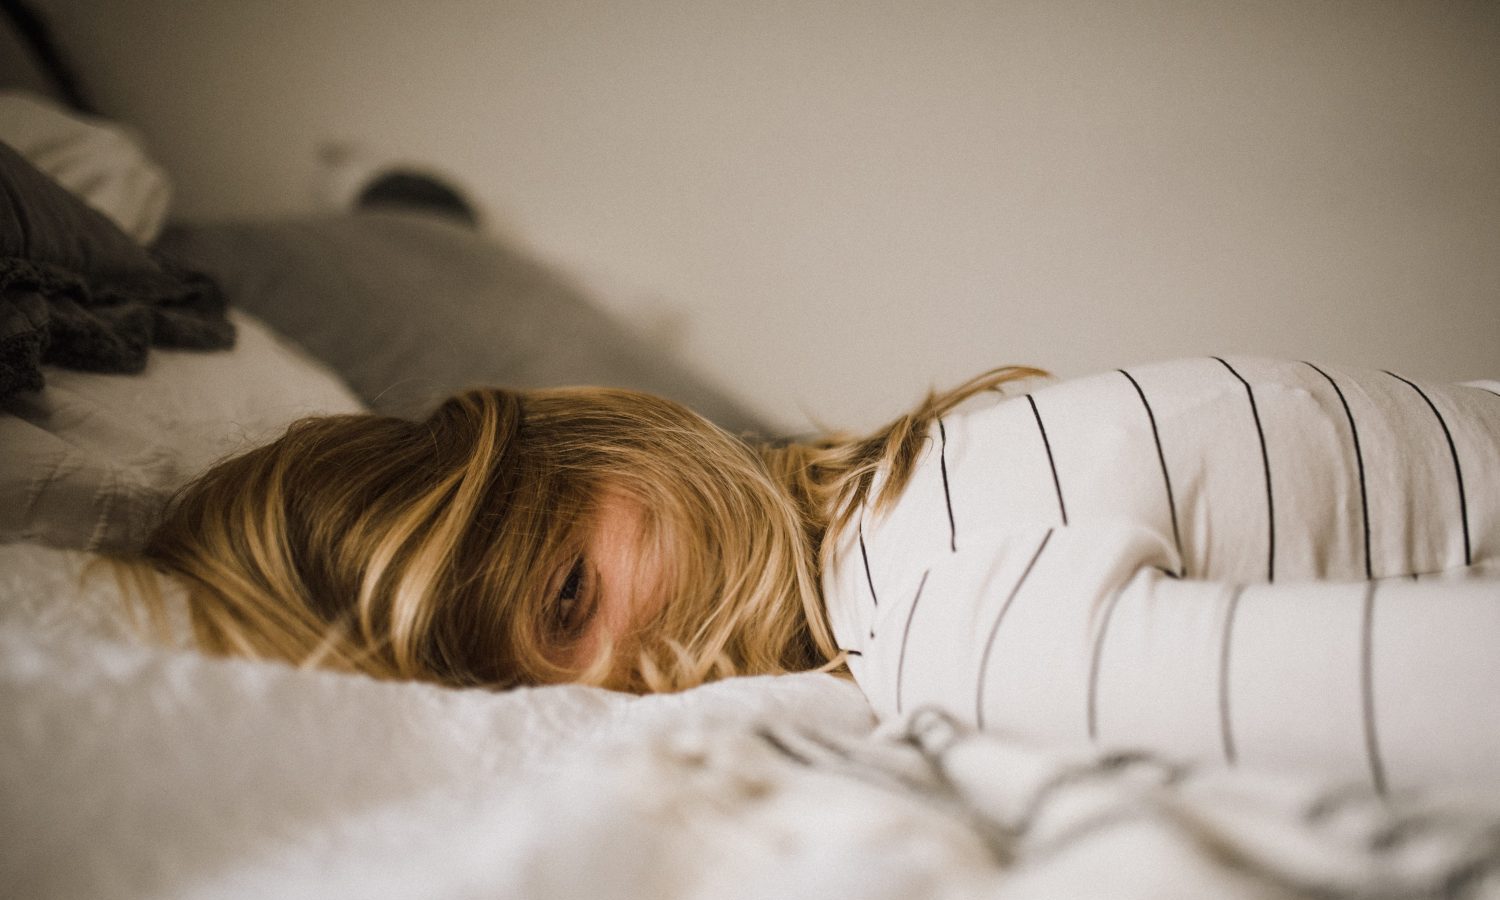 Evidence Explains Why Sleeping 8 Hours A Night Is So Difficult